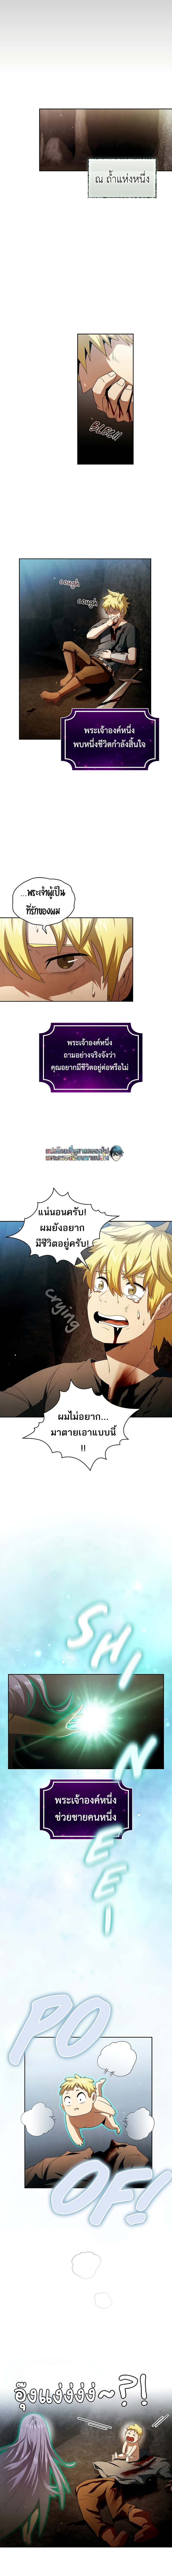 Is This Hero for Real à¸à¸­à¸à¸à¸µà¹ 35 (4)